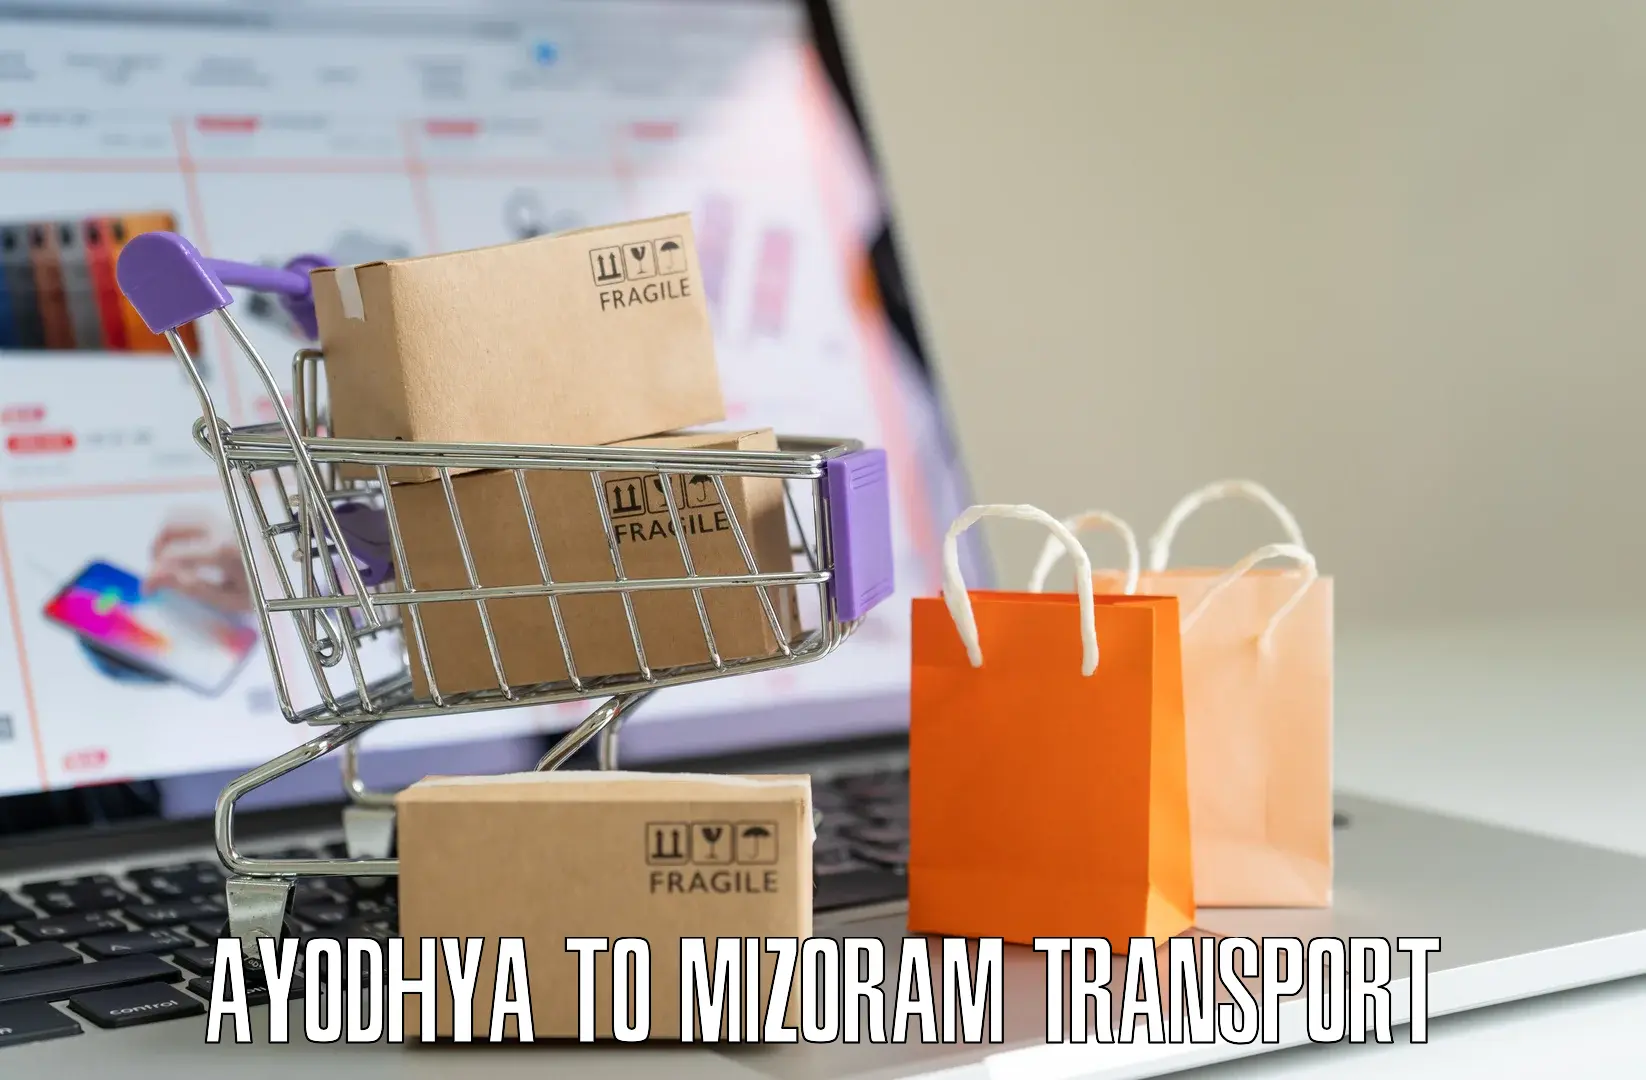 Commercial transport service Ayodhya to Saitual